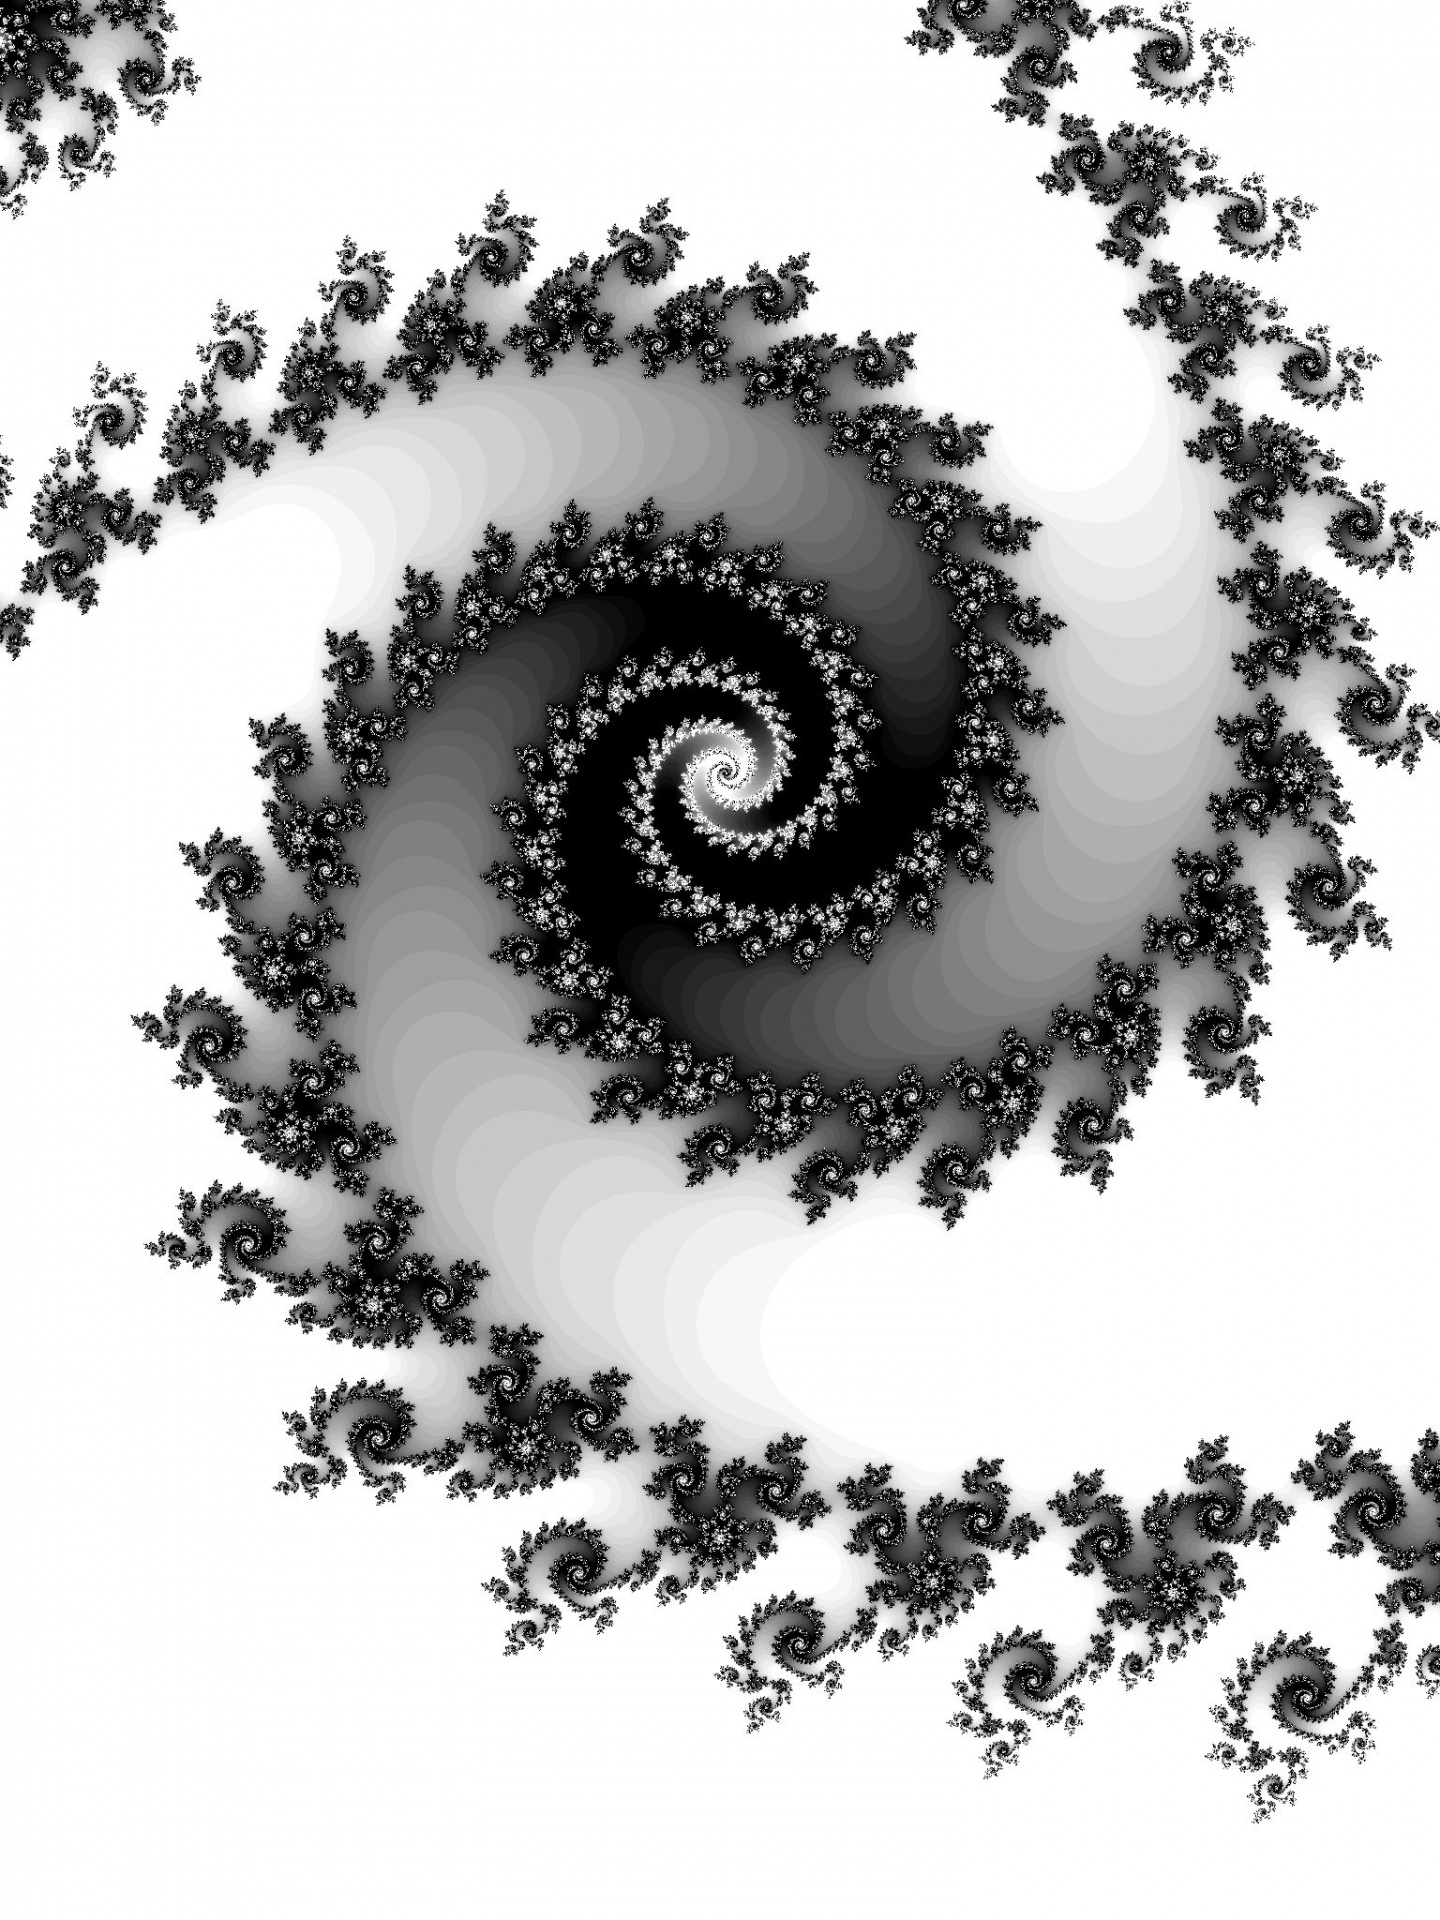 Fractal Spiral Free Stock Photo - Public Domain Pictures